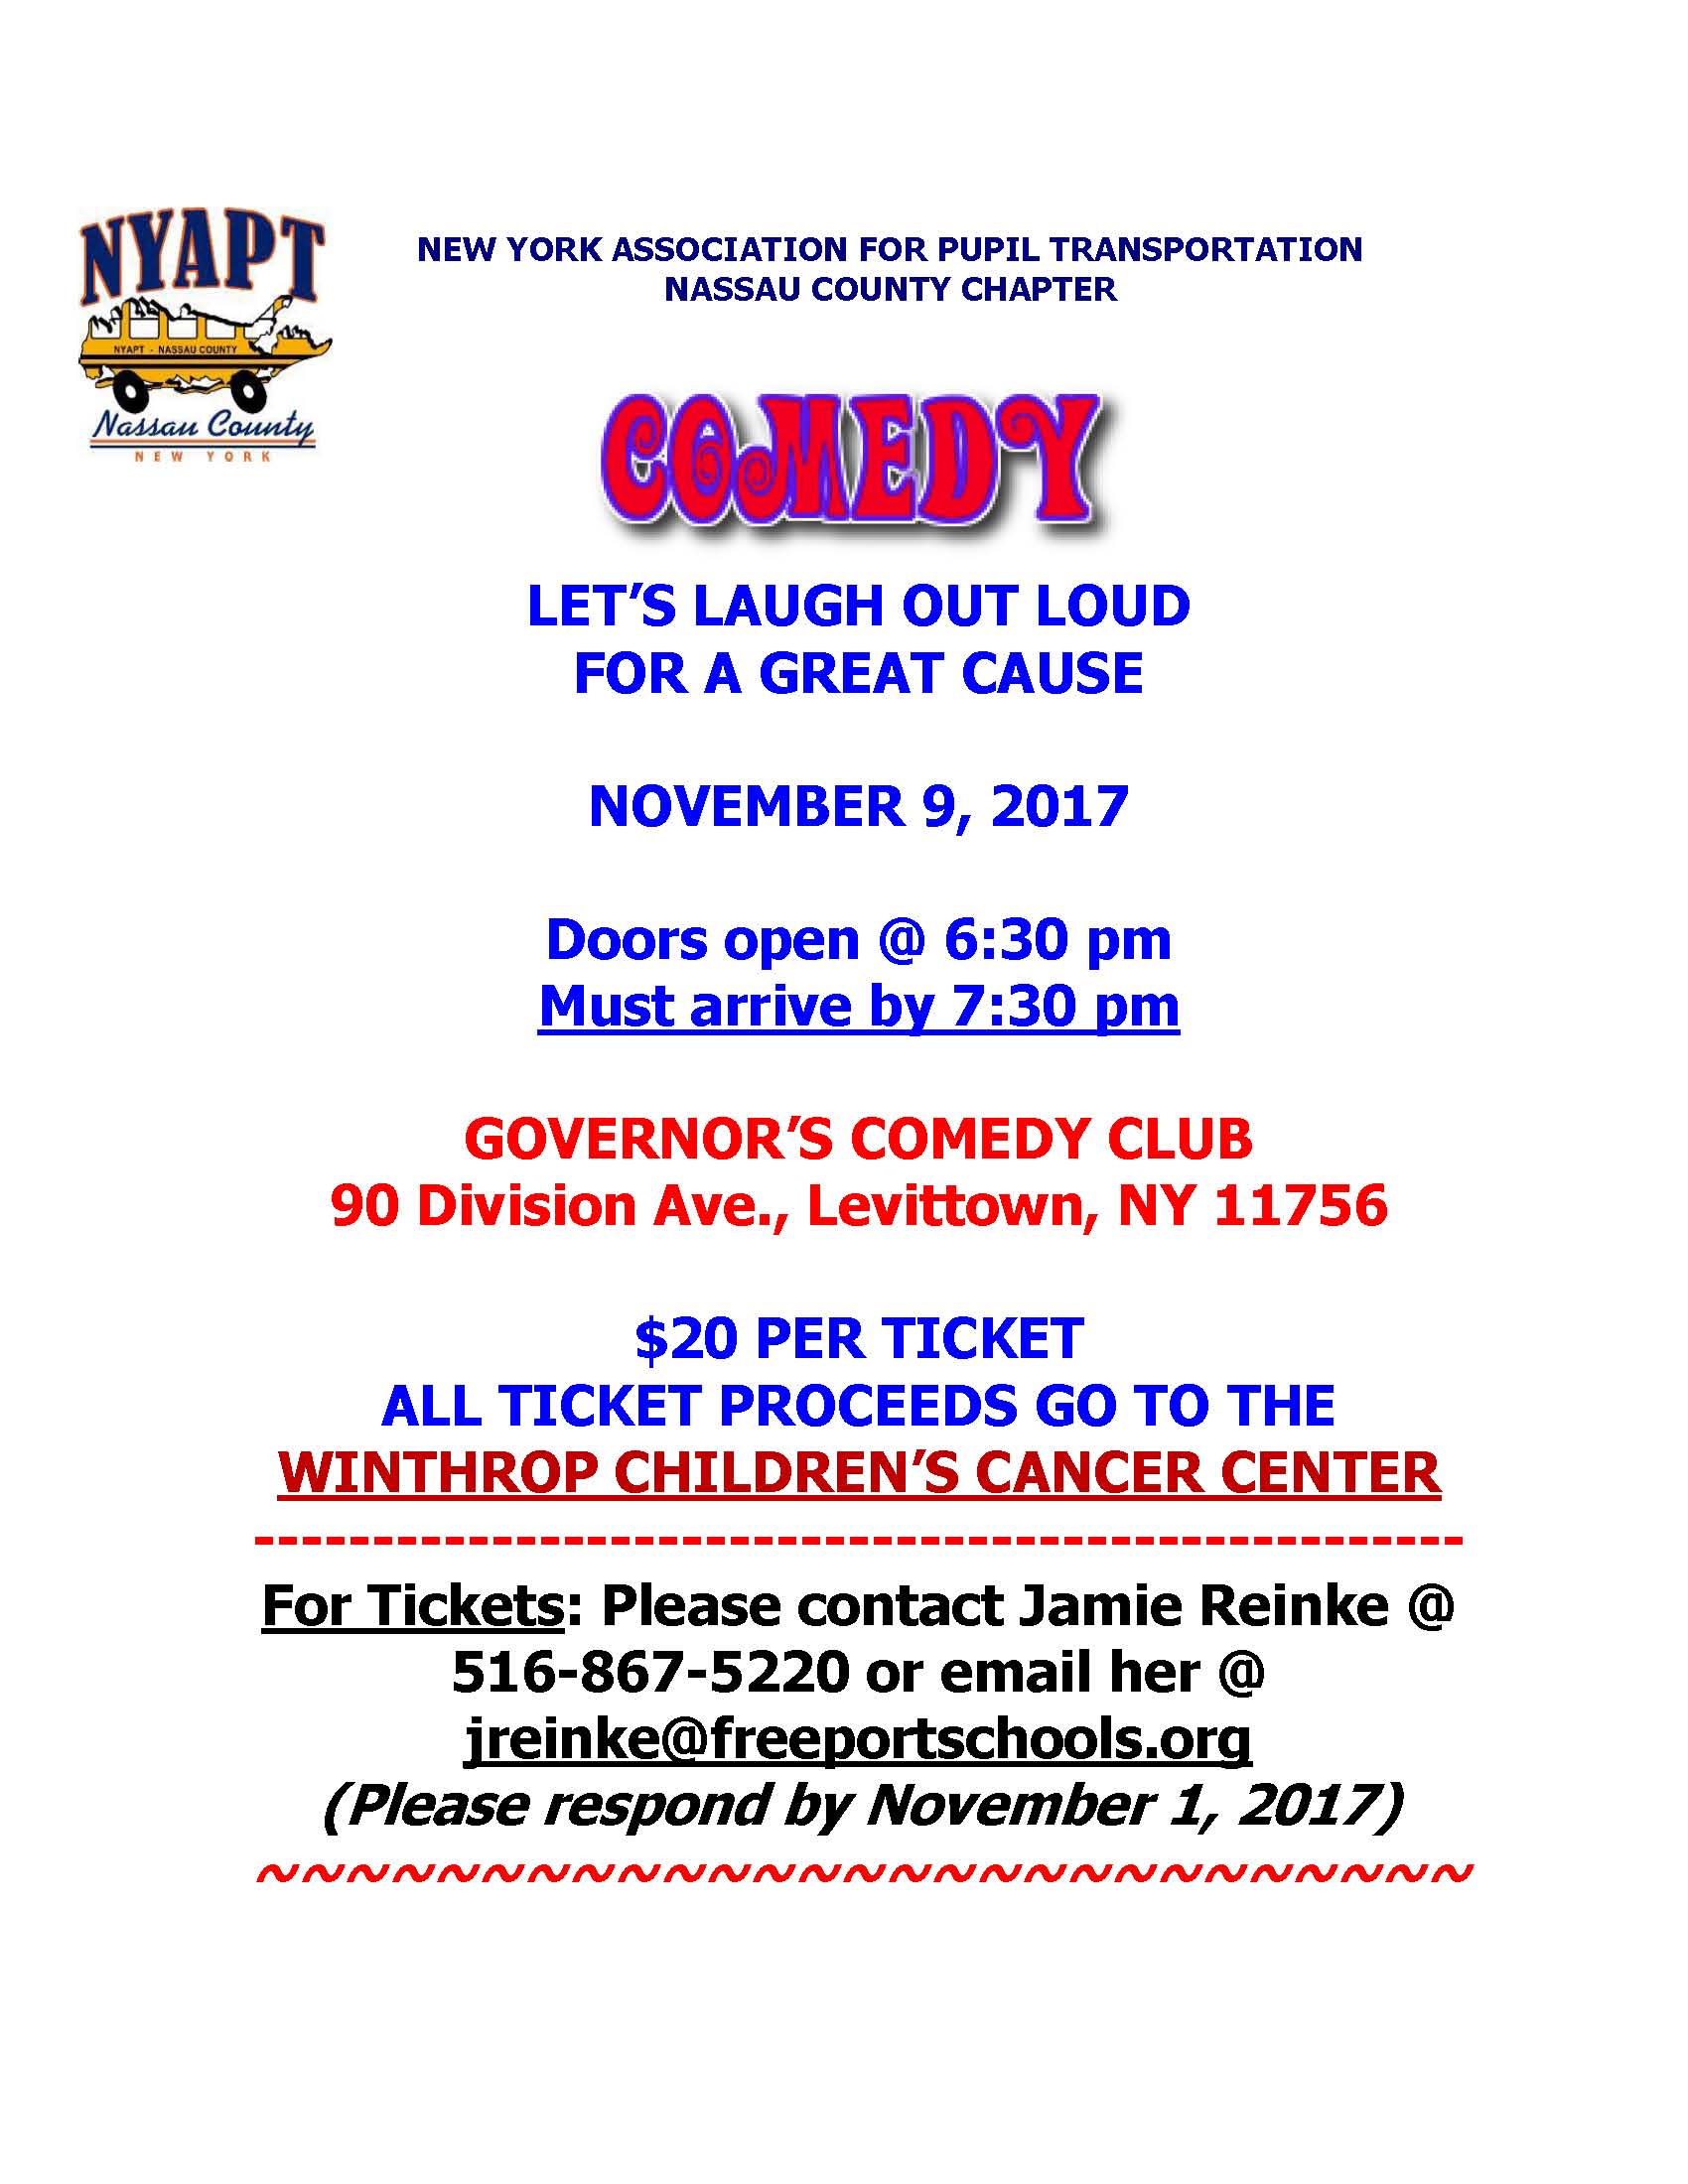 Comedy Club Event 2017 NYAPT Chapter